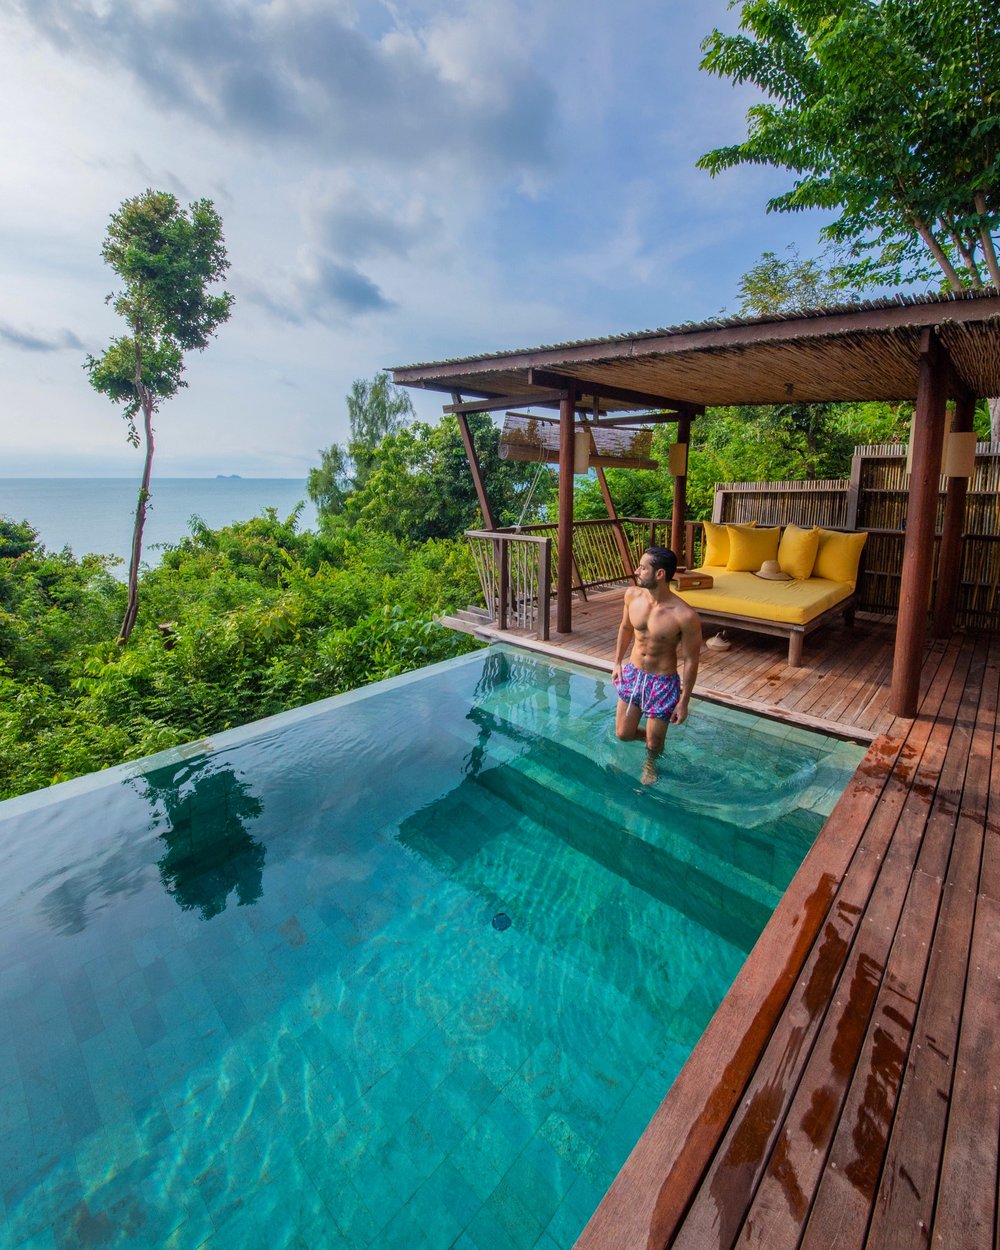  The Villa with a private pool is perfect for couples looking for total privacy.  